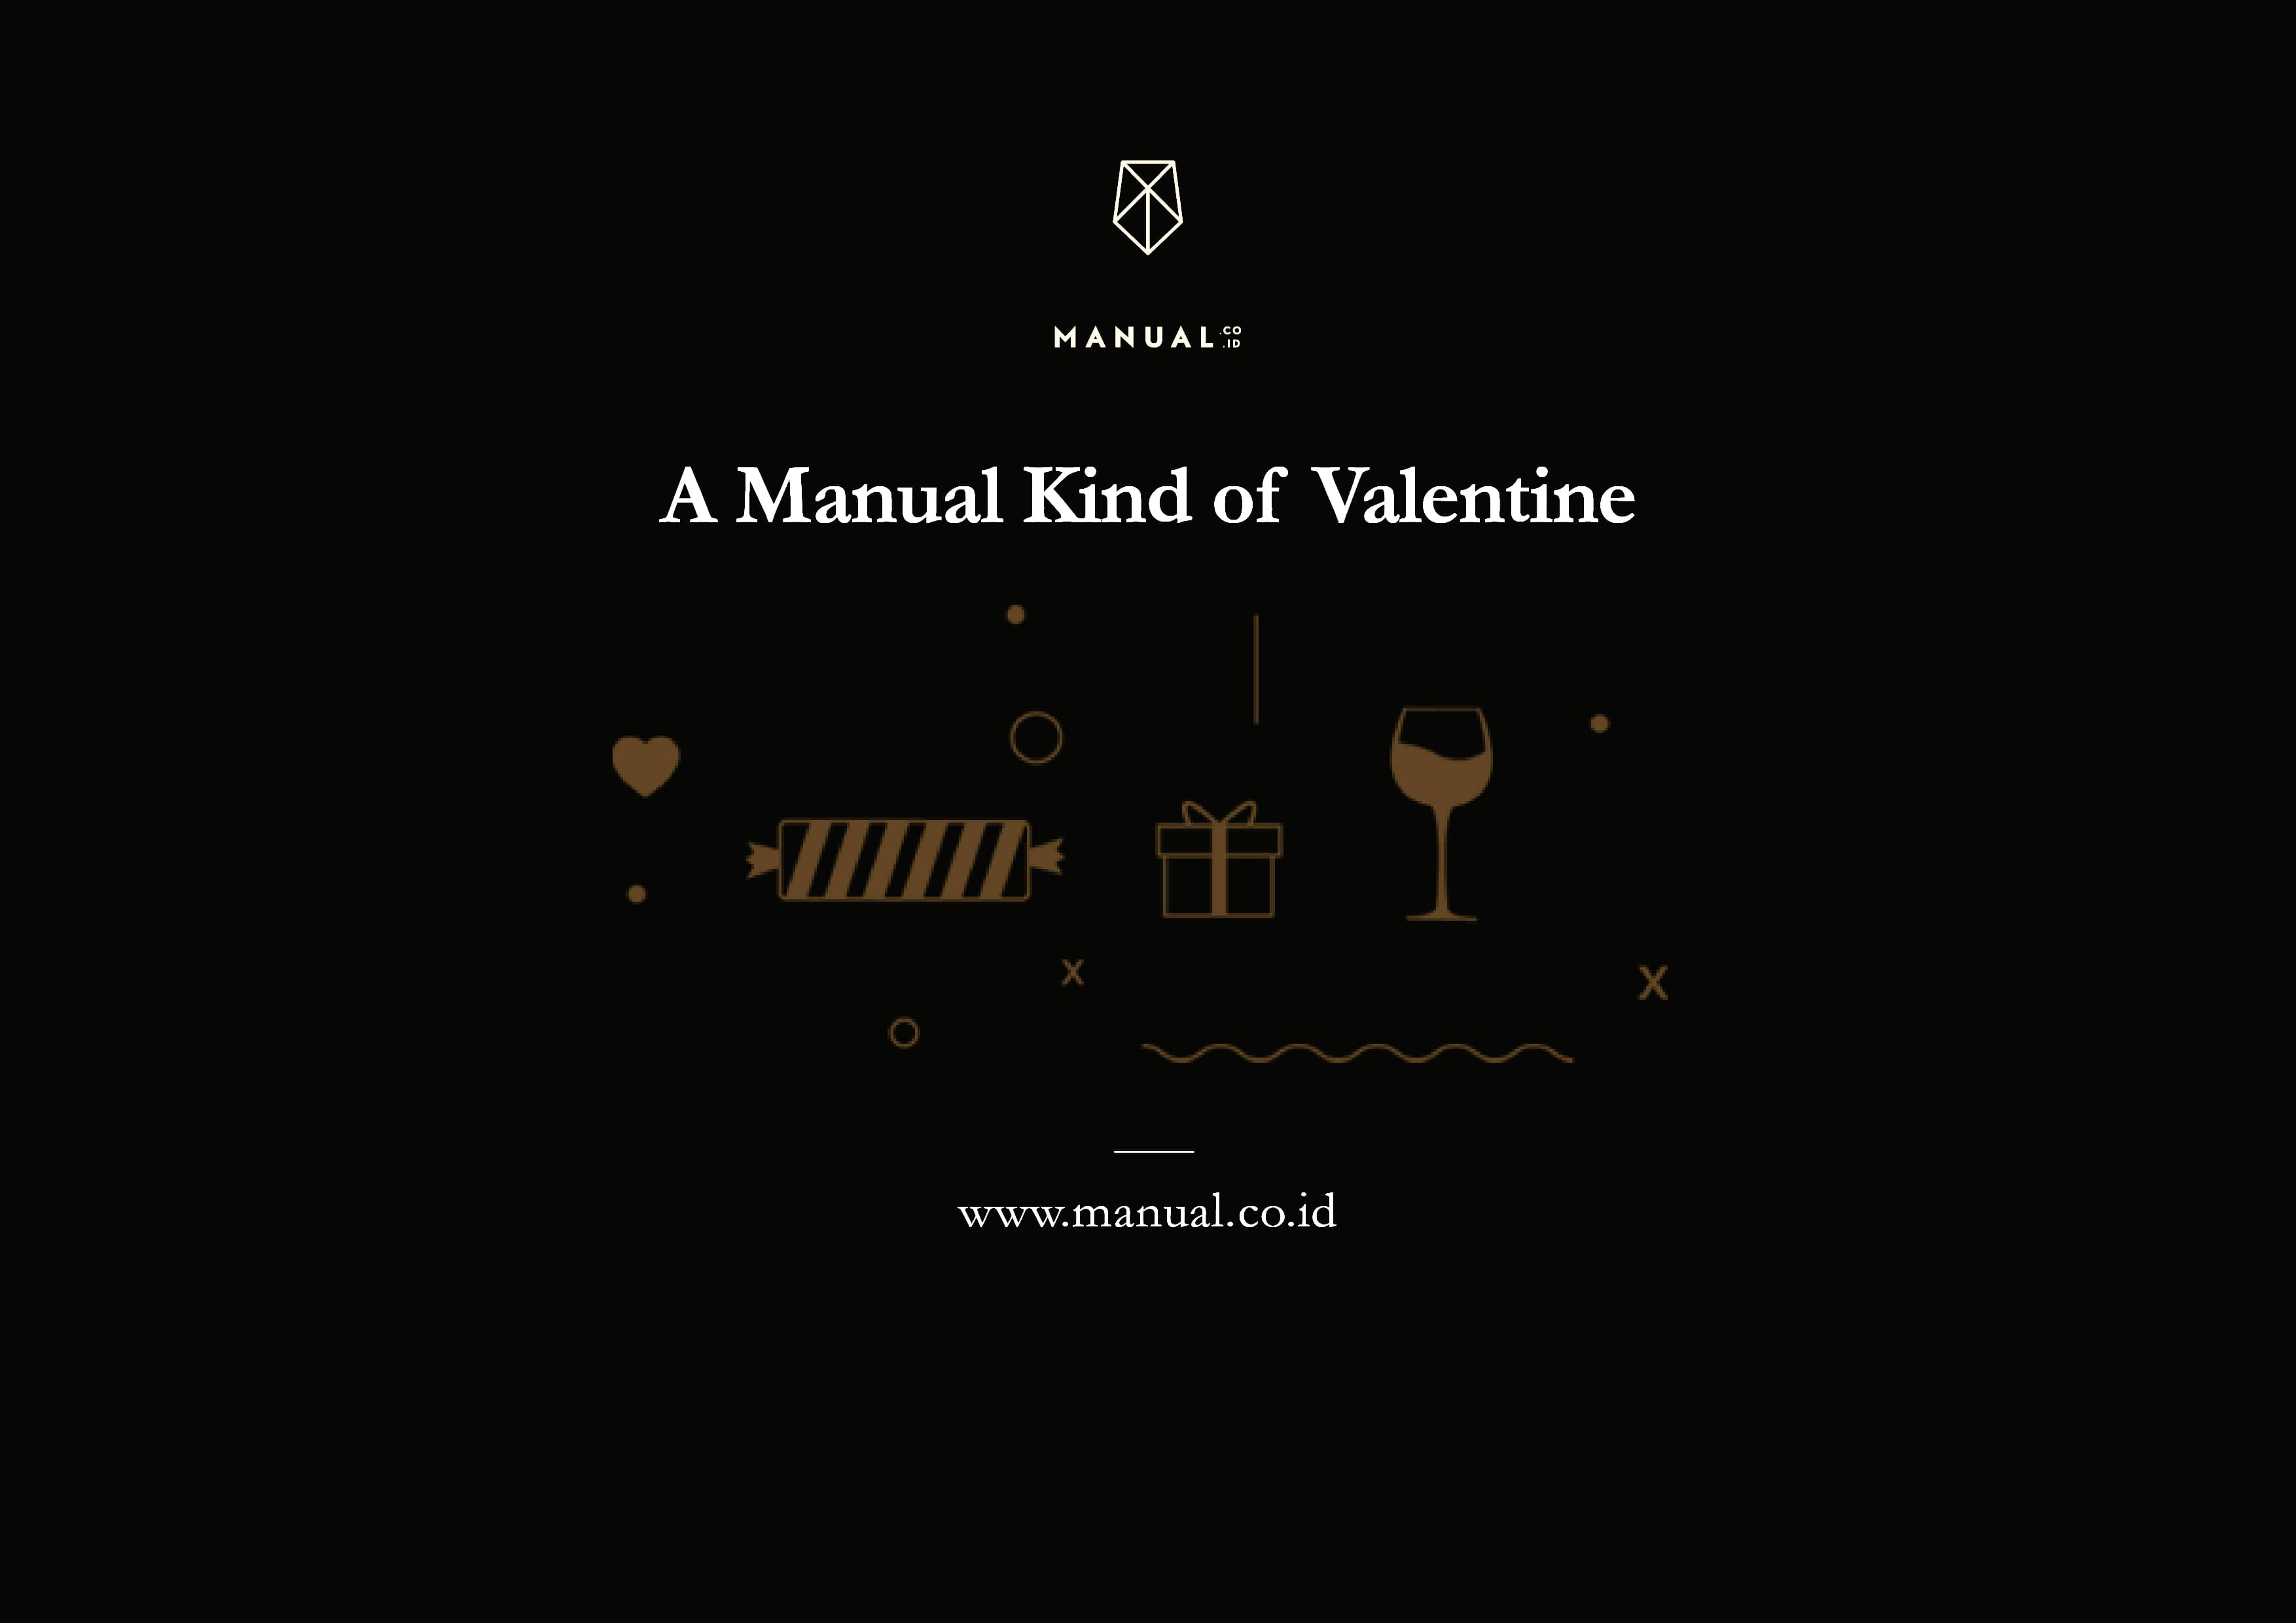 A Manual Kind of Valentine